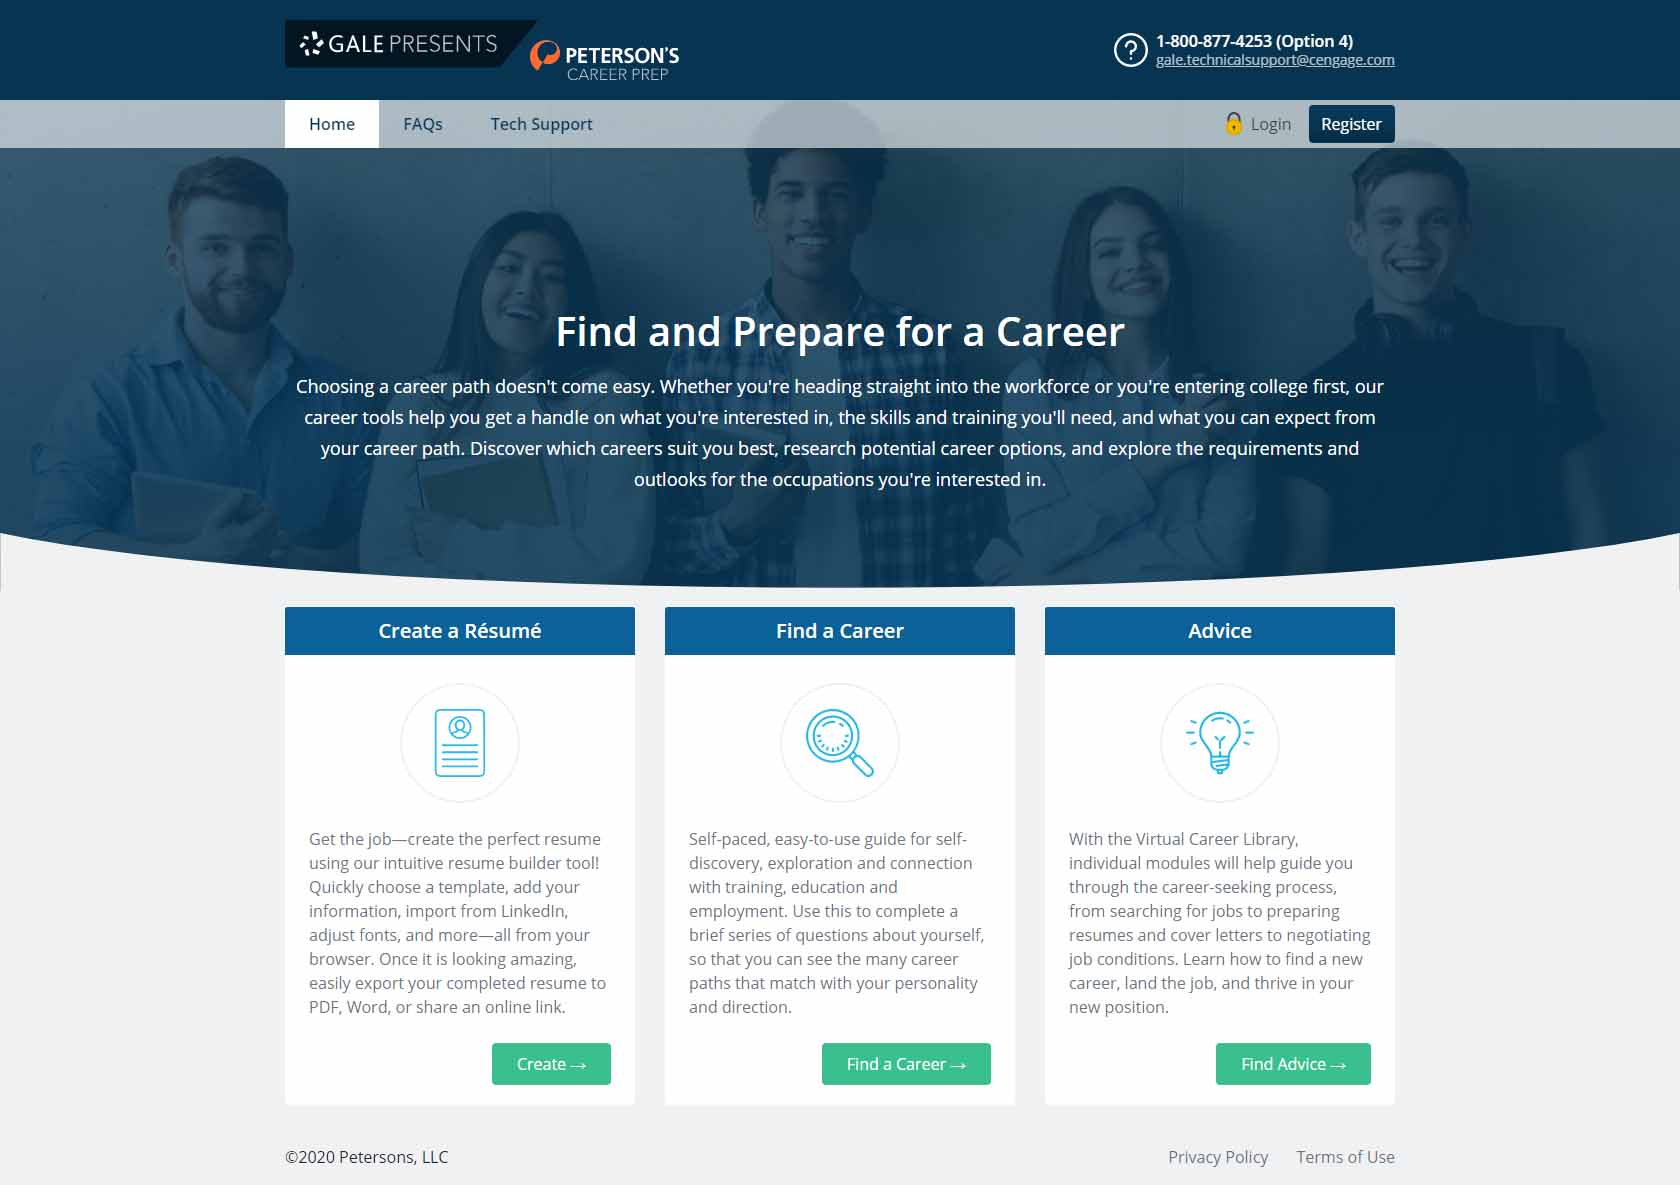 Gale Presents: Peterson's Career Prep is mobile accessible and features a simple homepage design.